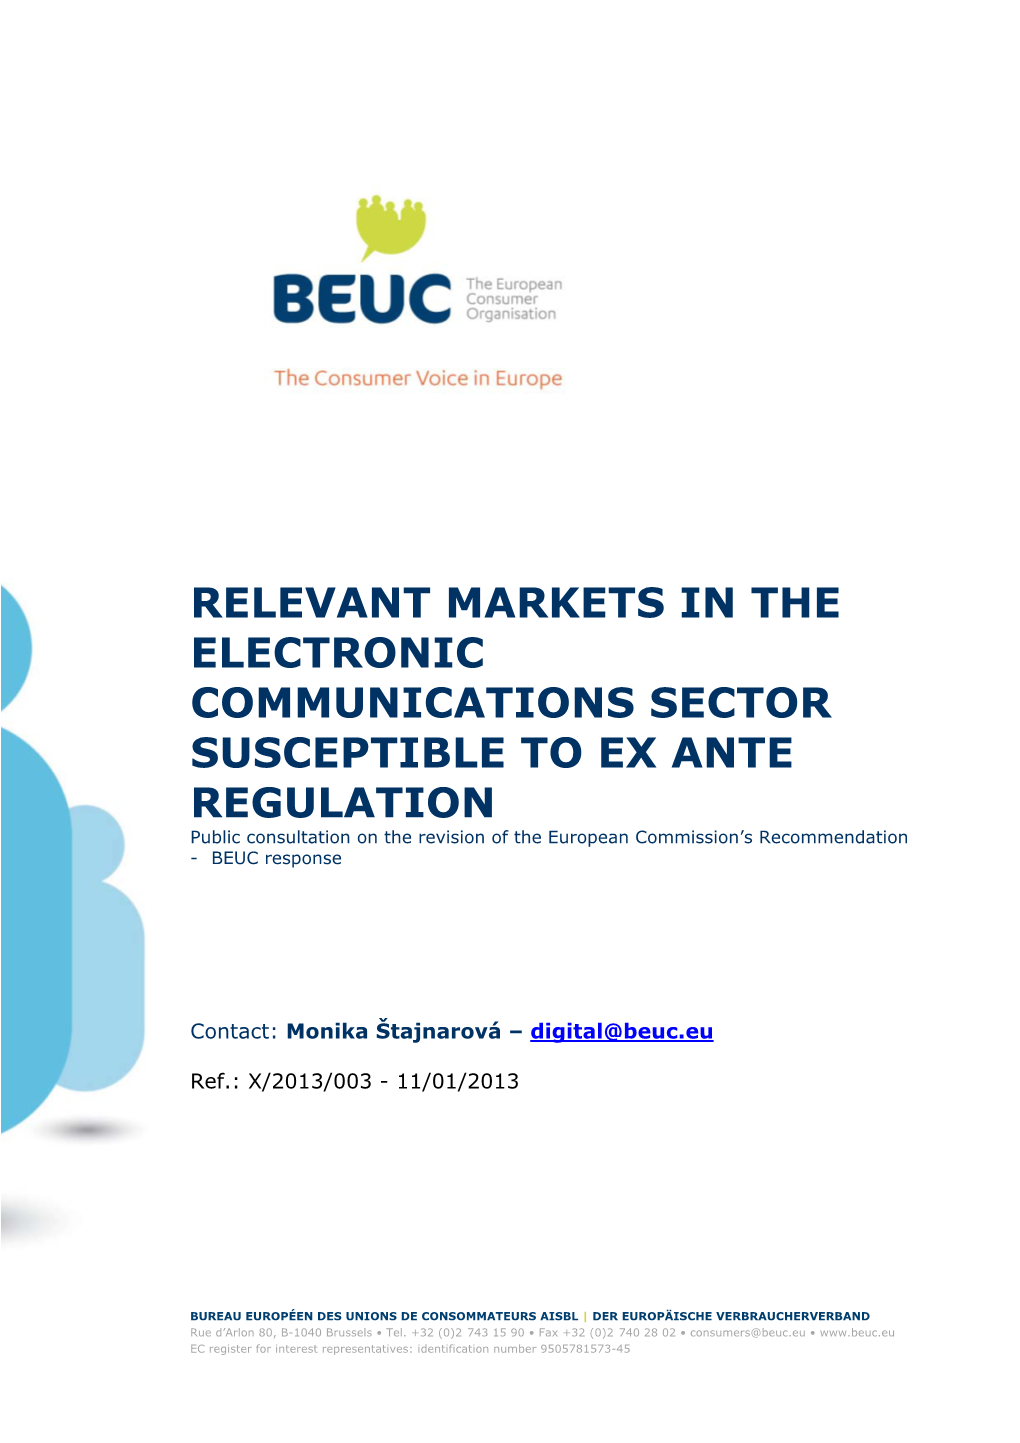 The Electronic Communications Sector & Ex Ante Regulation